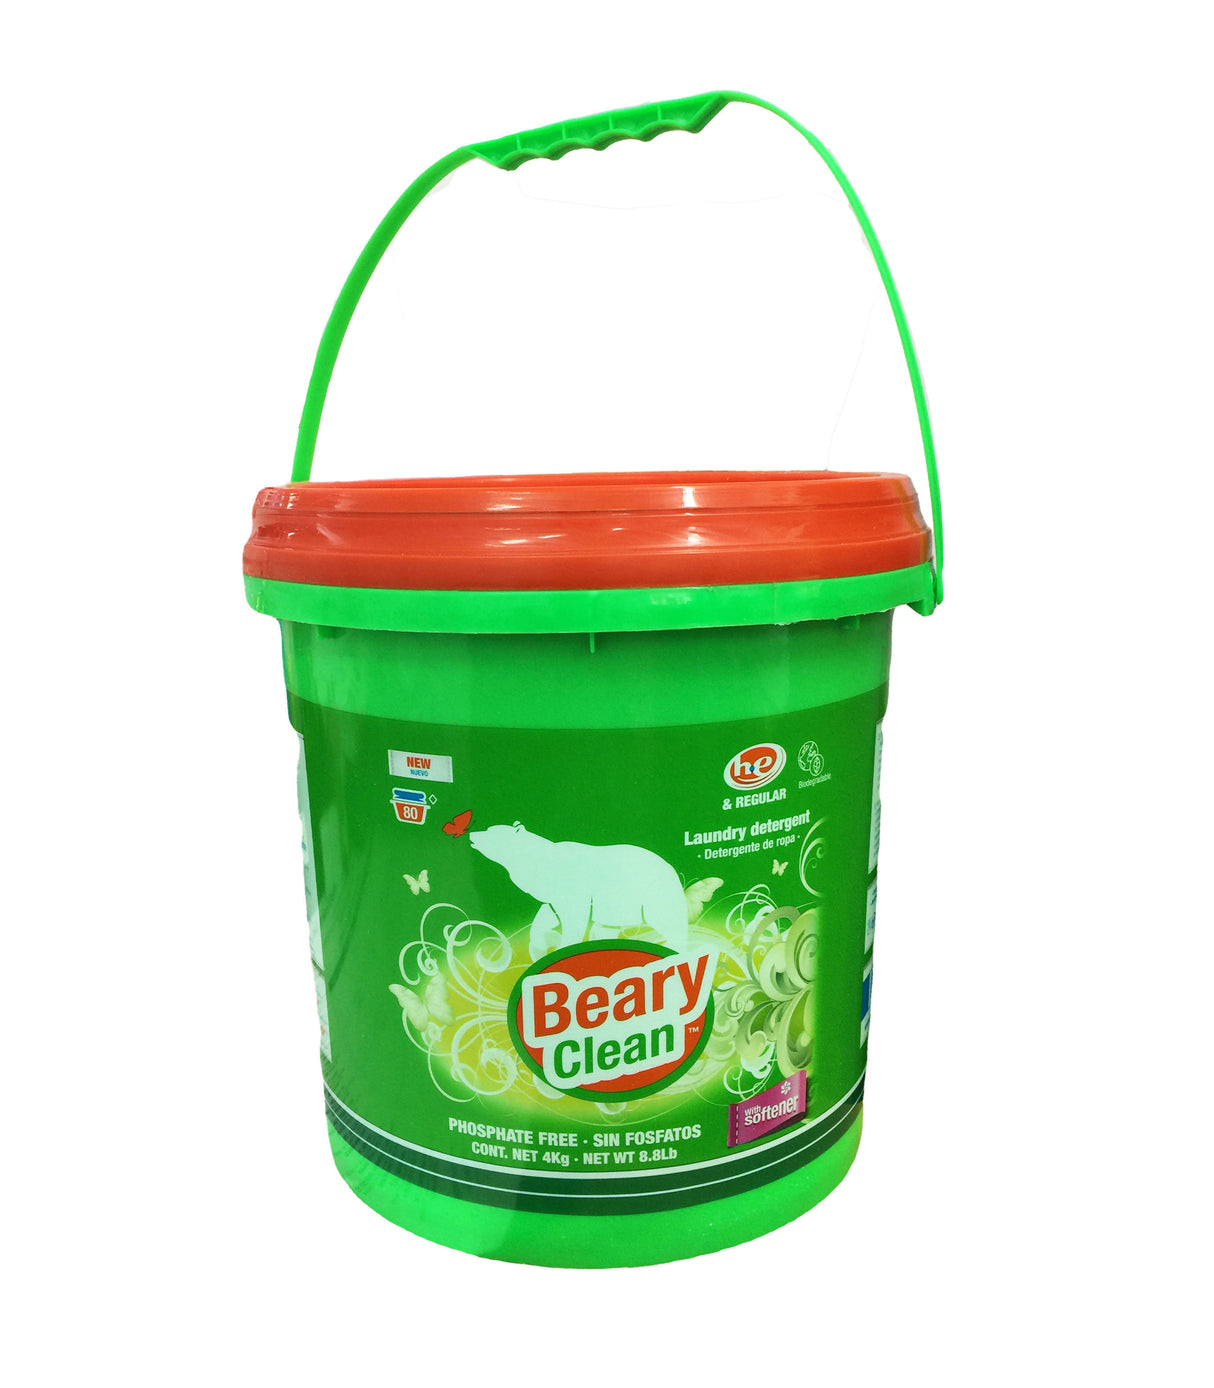 Beary Clean, Laundry Detergent